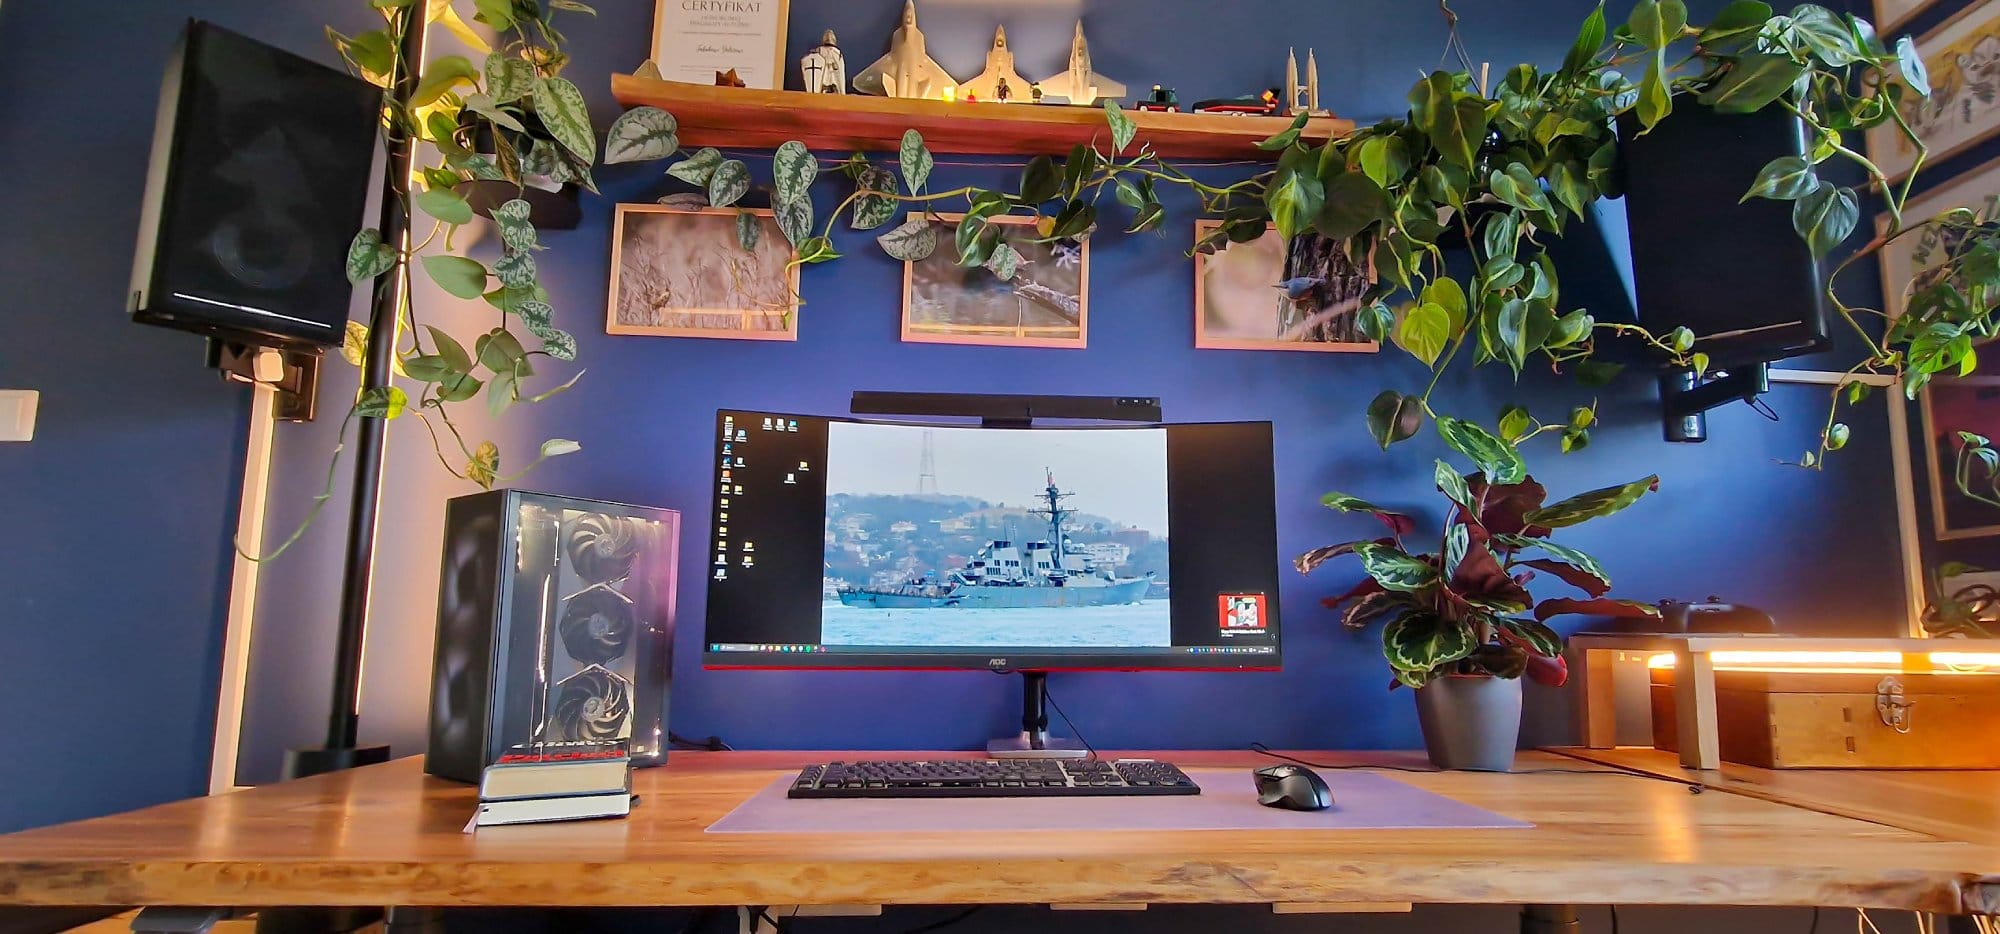 A serene and stylish home office setup featuring a wooden desk with a gaming monitor, surrounded by lush indoor plants, decorative items on a shelf above, and ambient lighting